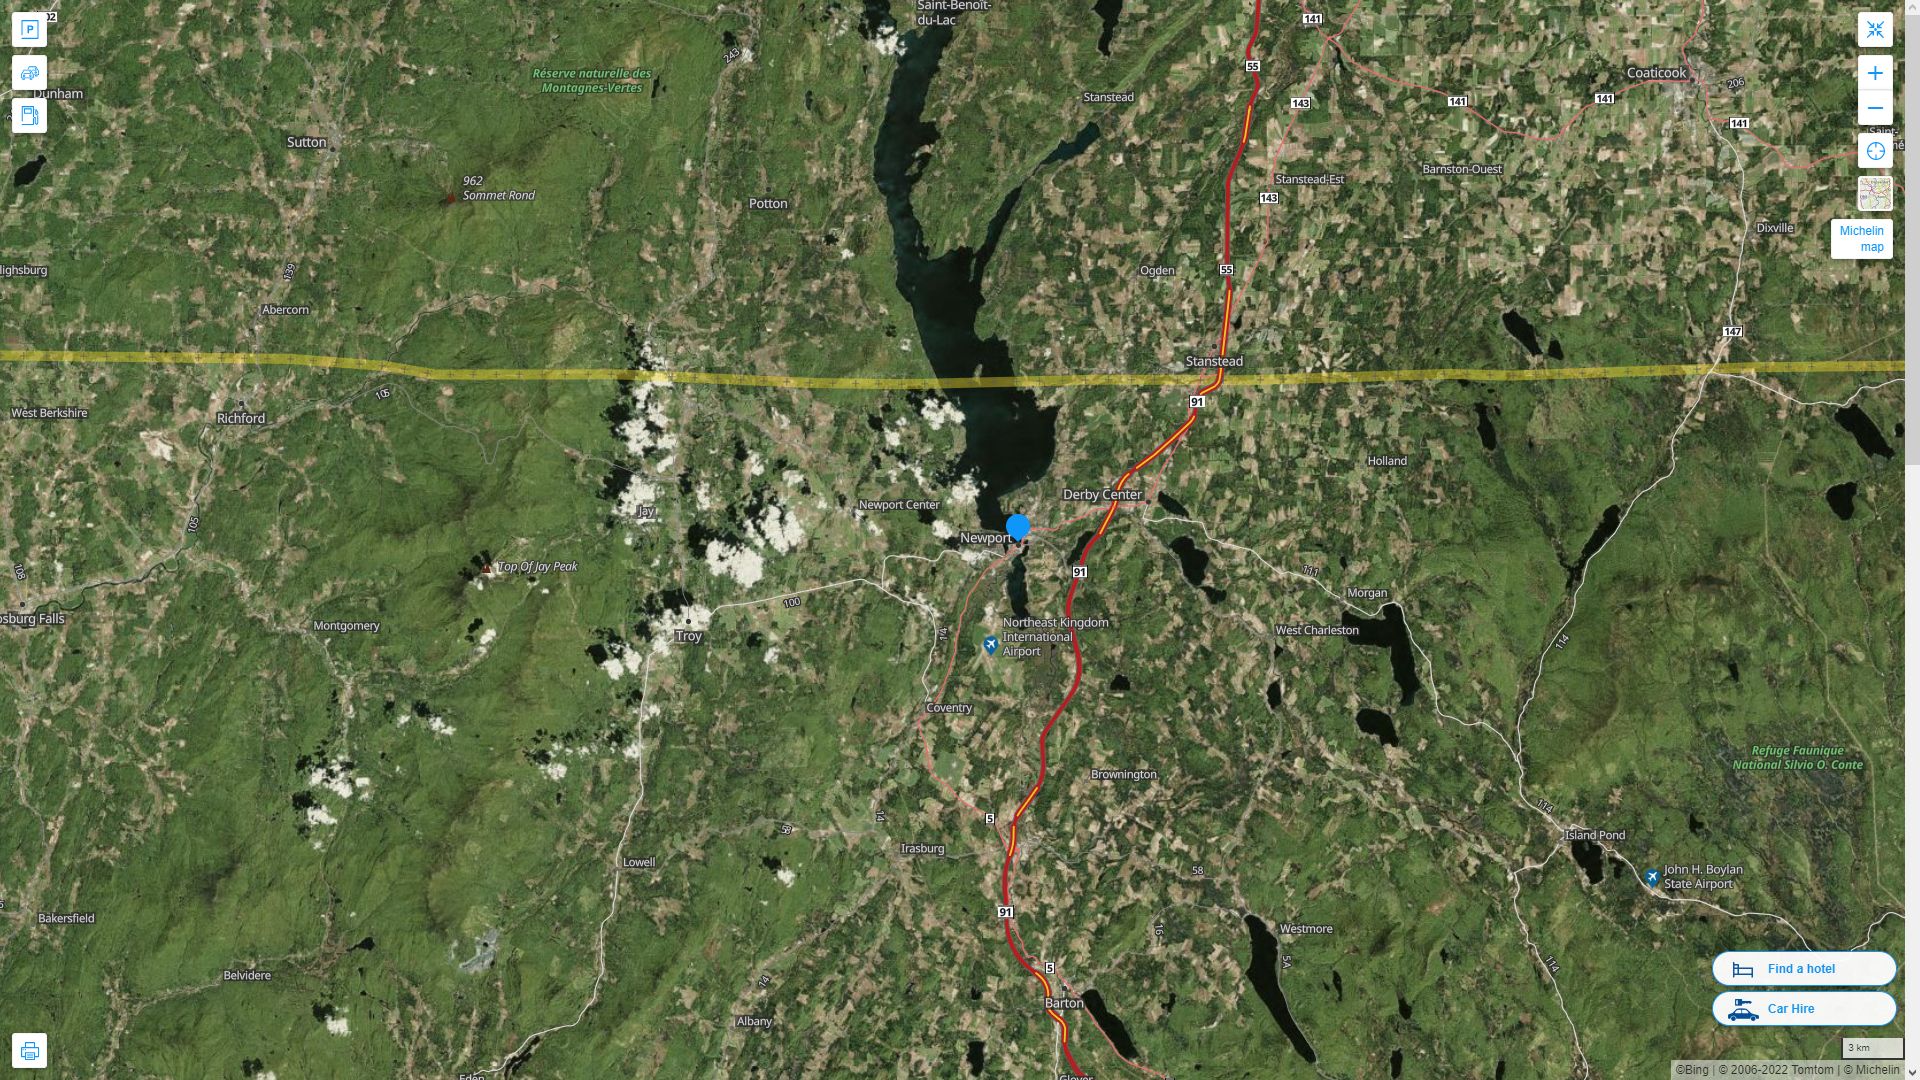 Newport Vermont Highway and Road Map with Satellite View